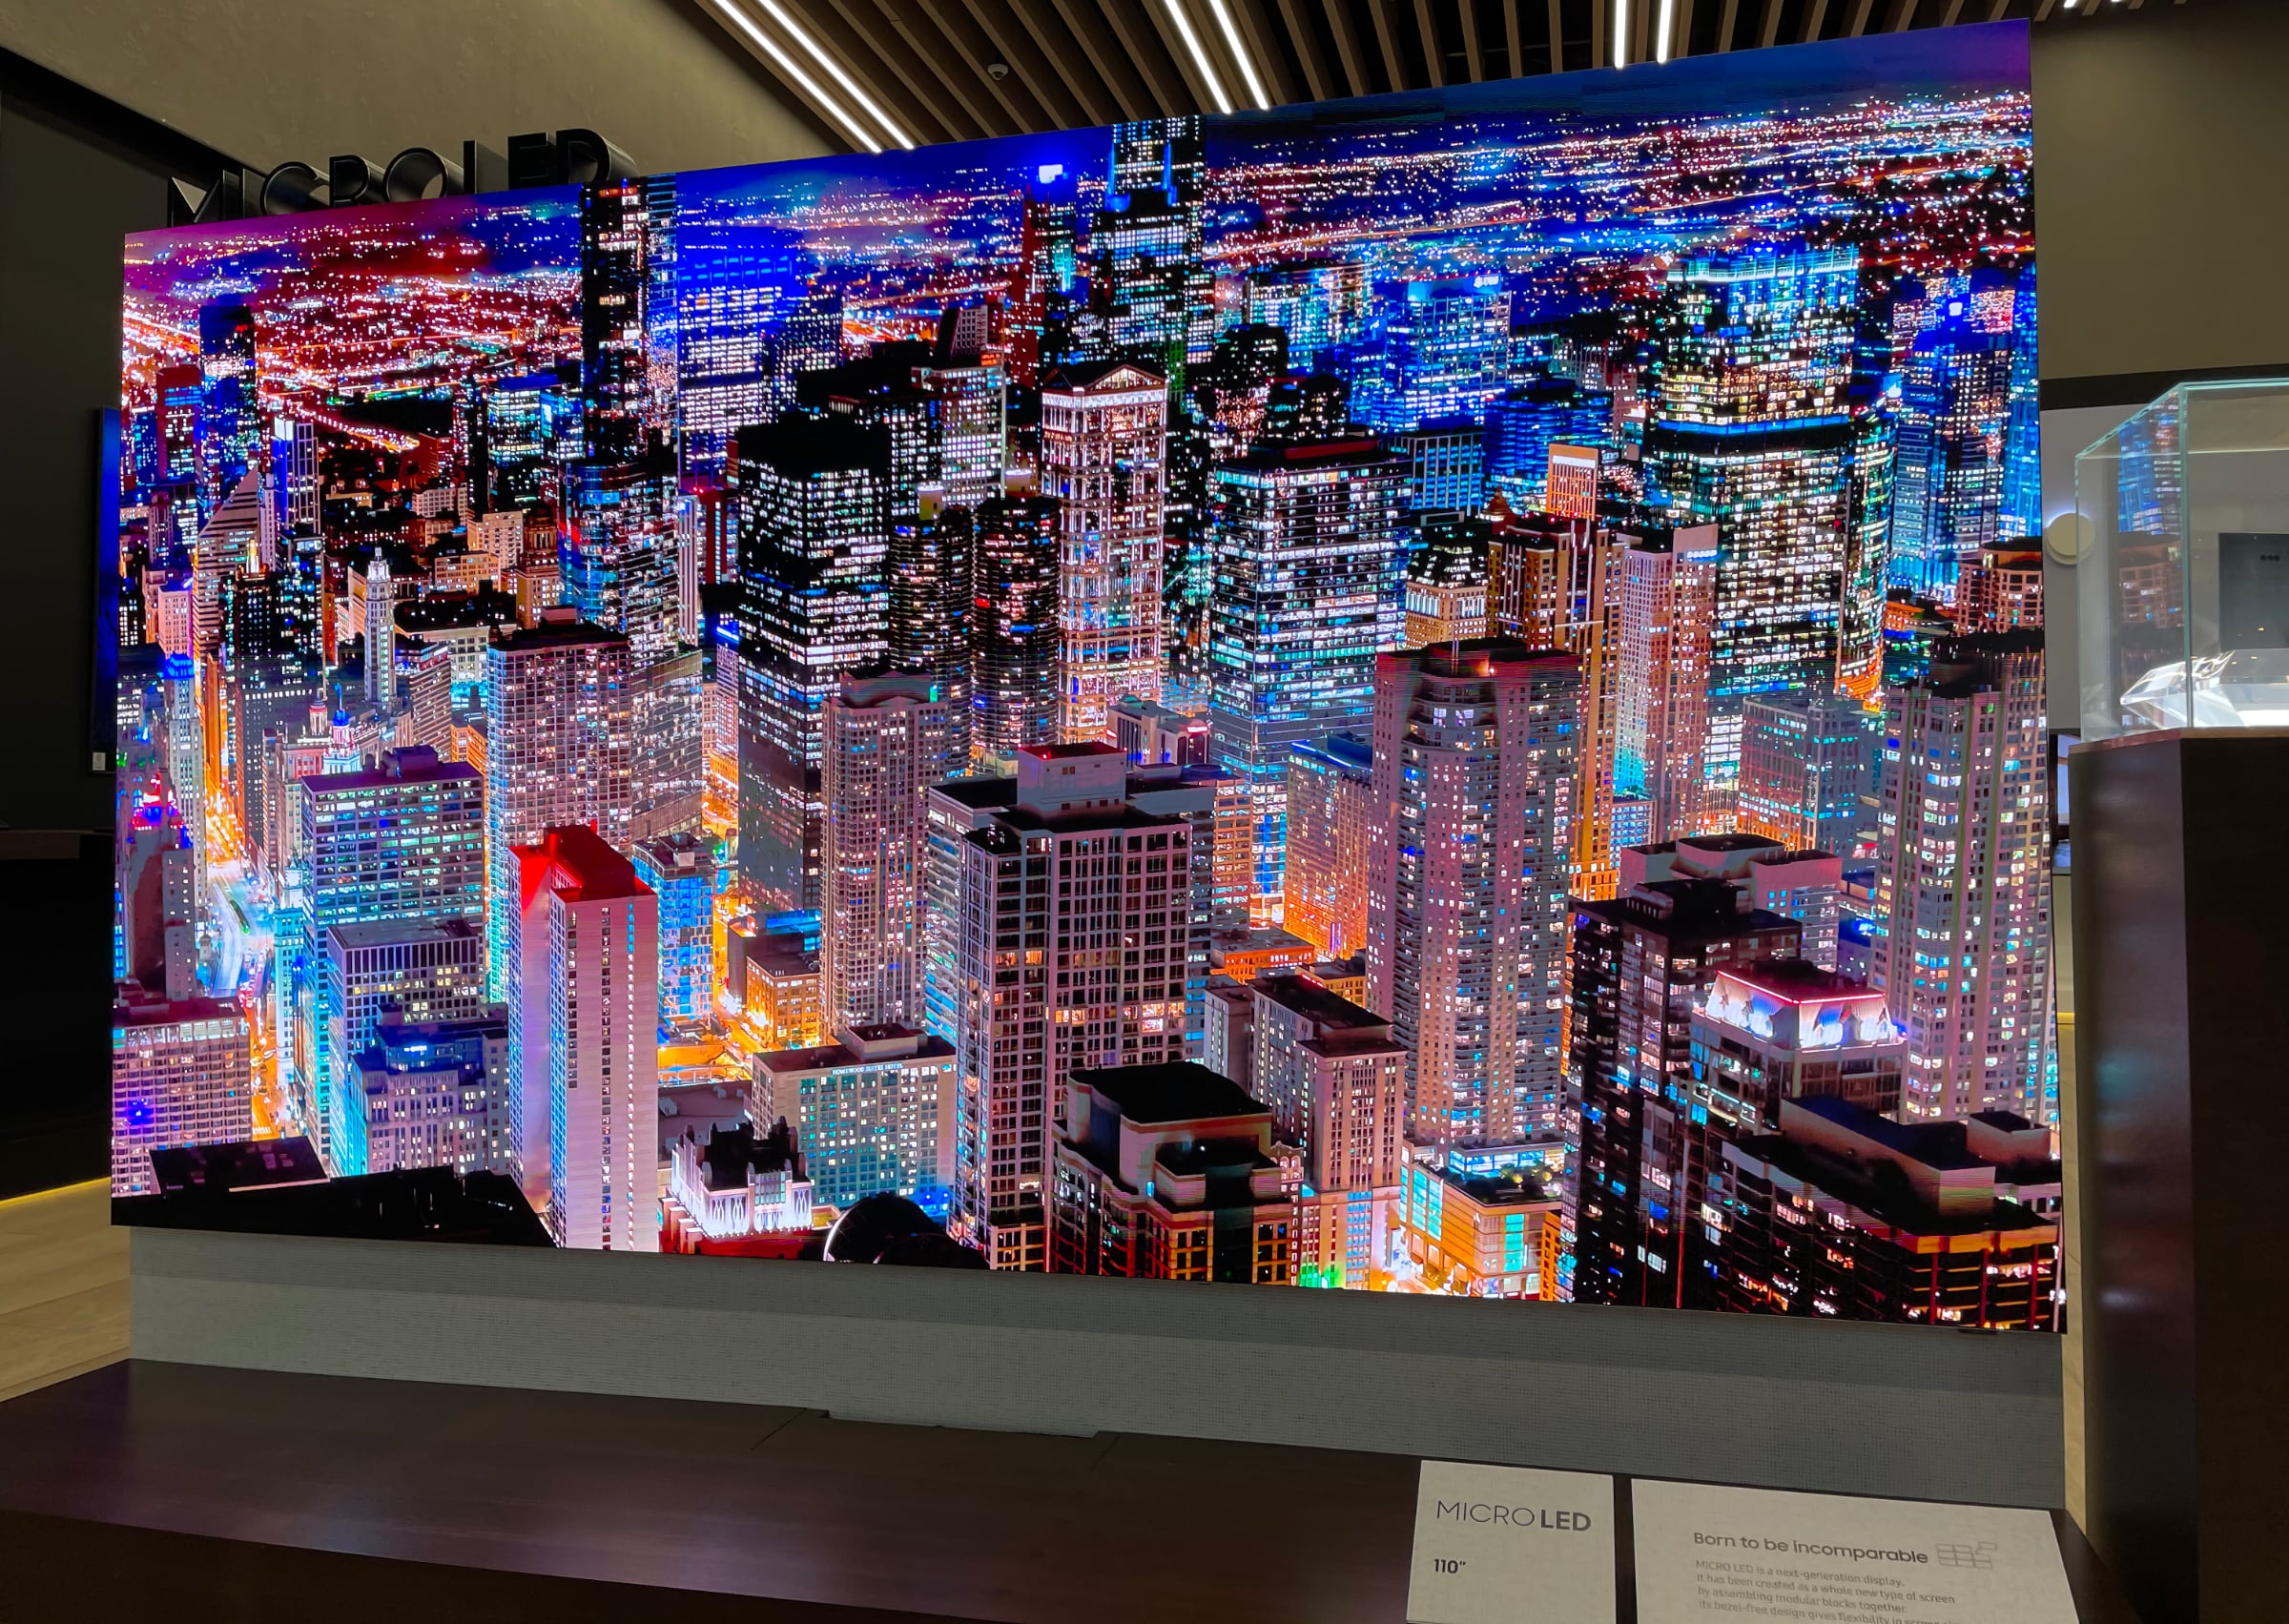 First look: Samsung's 110" microLED TV -